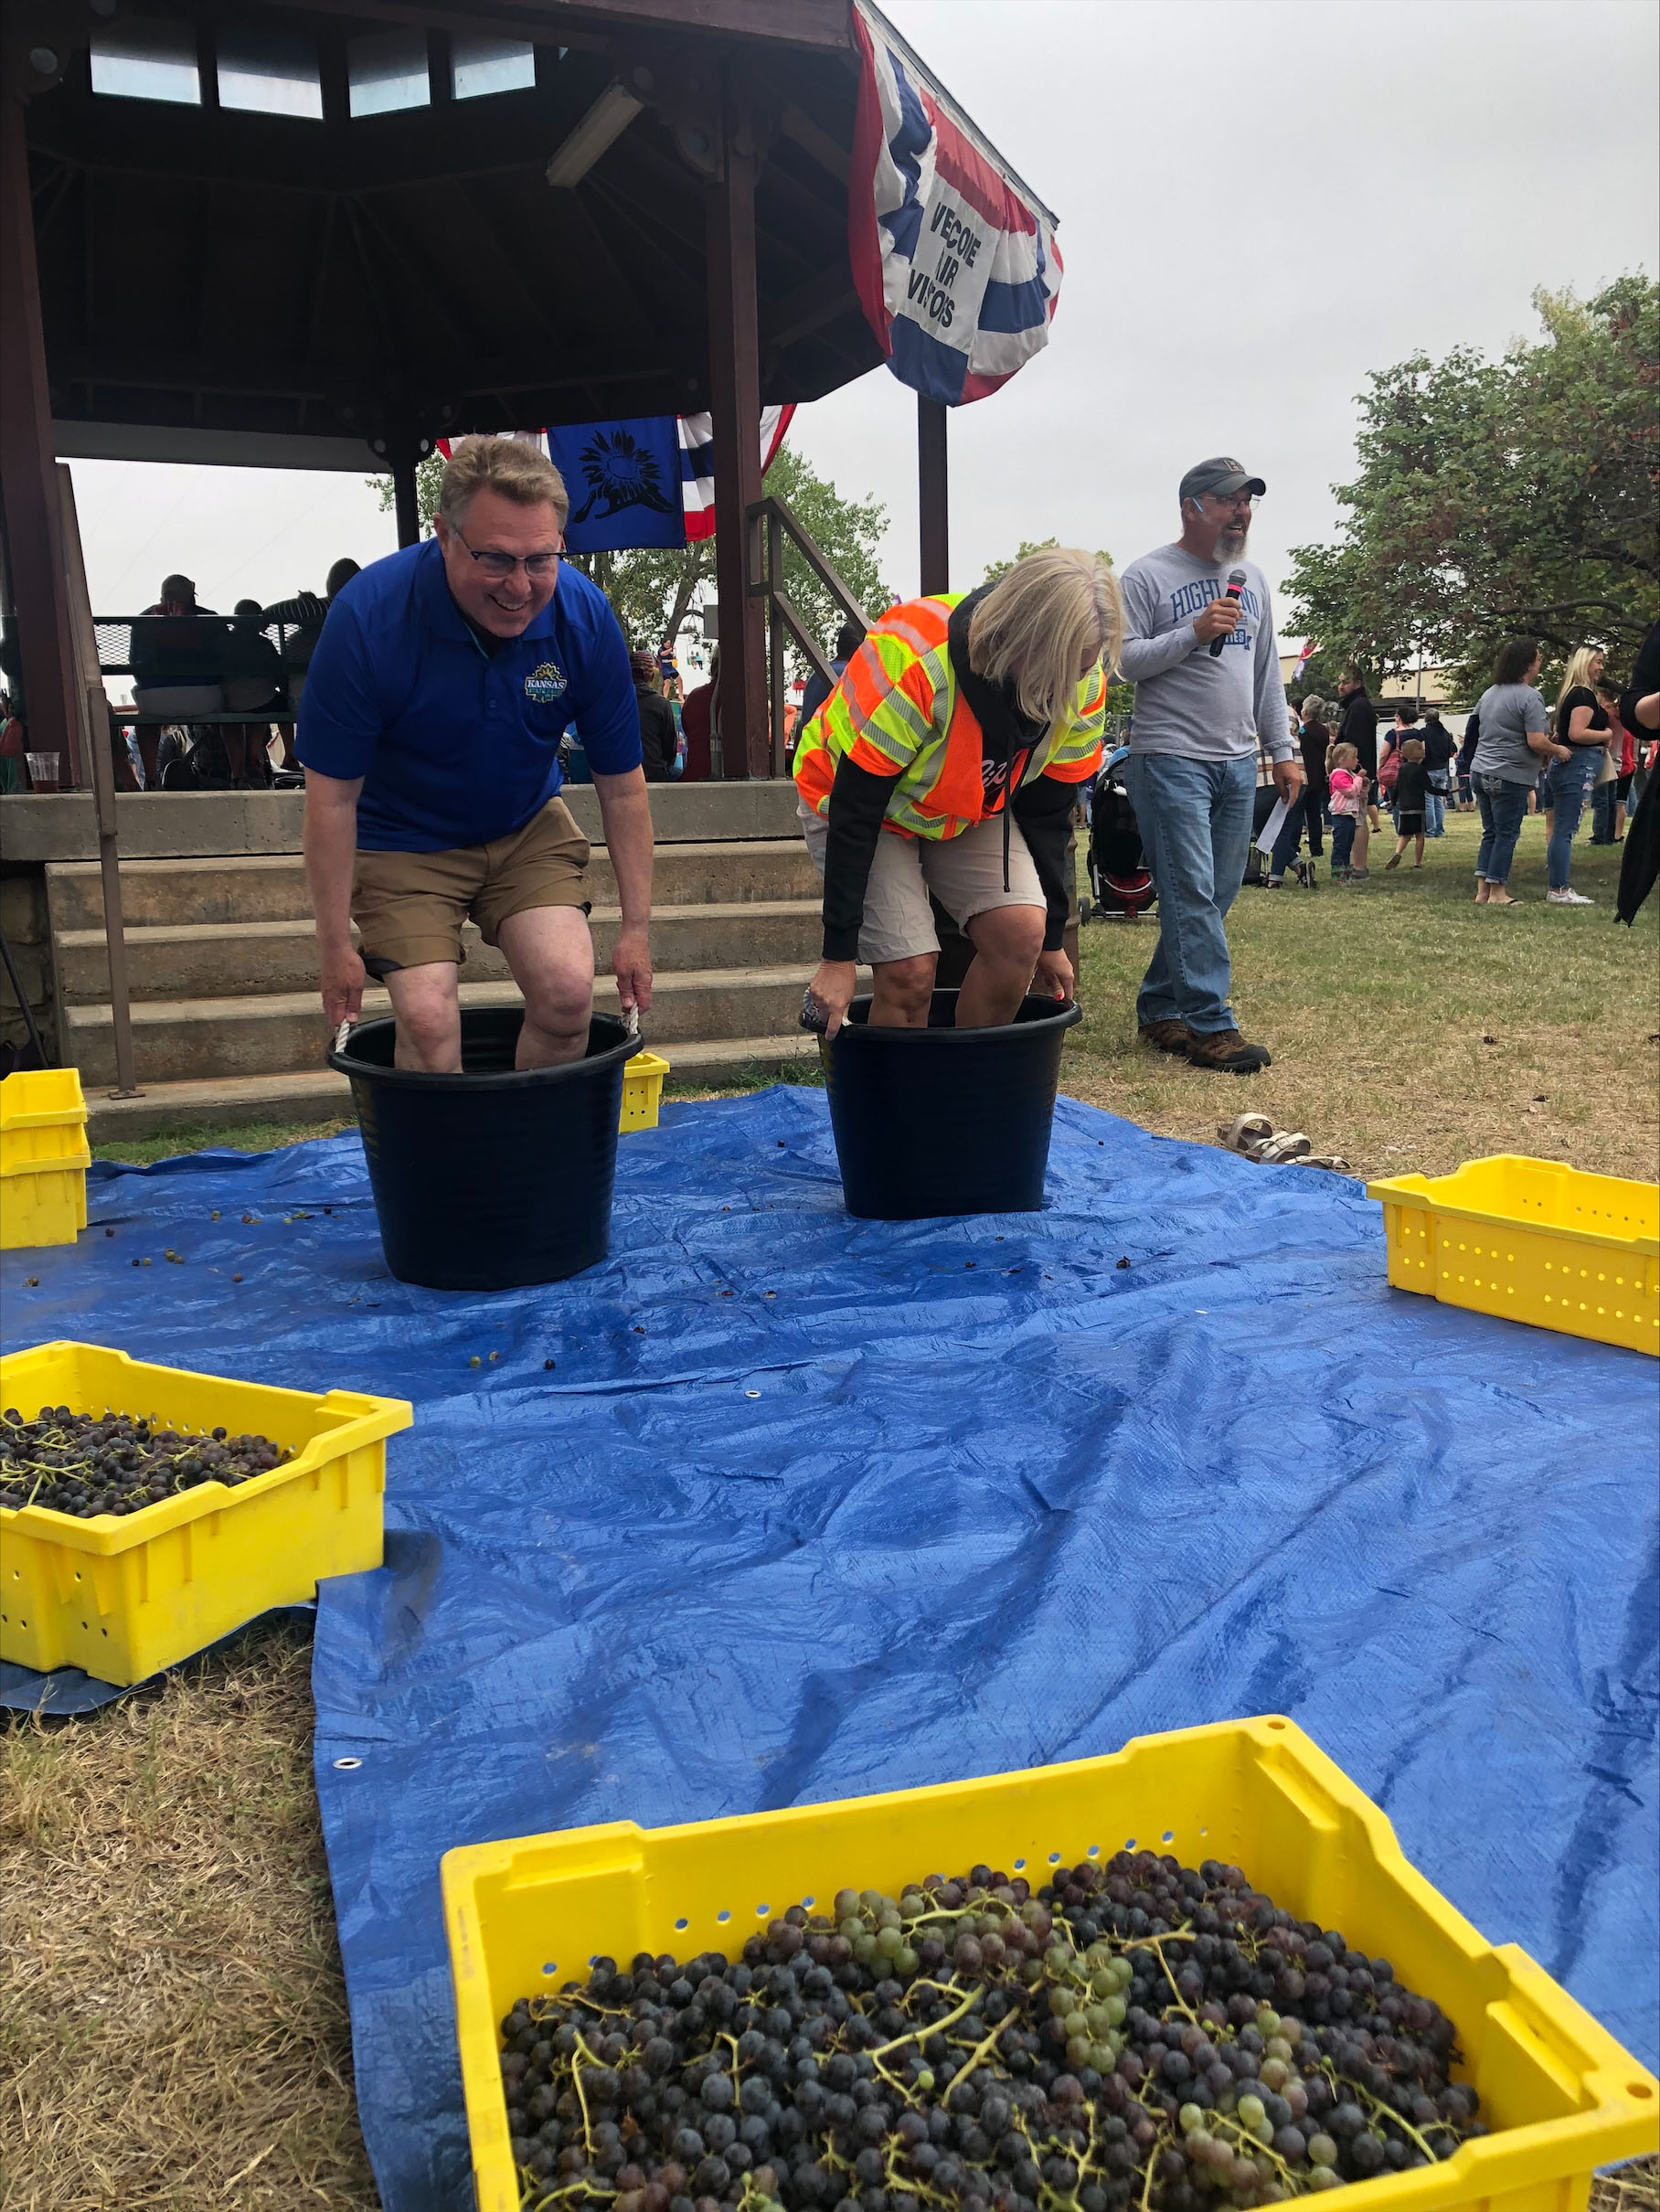 Secretary of Agriculture Mike Beam competed against then-Secretary of Transportation Julie Lorenz during the 2022 Kansas Grape Stomp at the Kansas State Fair in Hutchinson. (Photo courtesy of Kansas Department of Agriculture.)